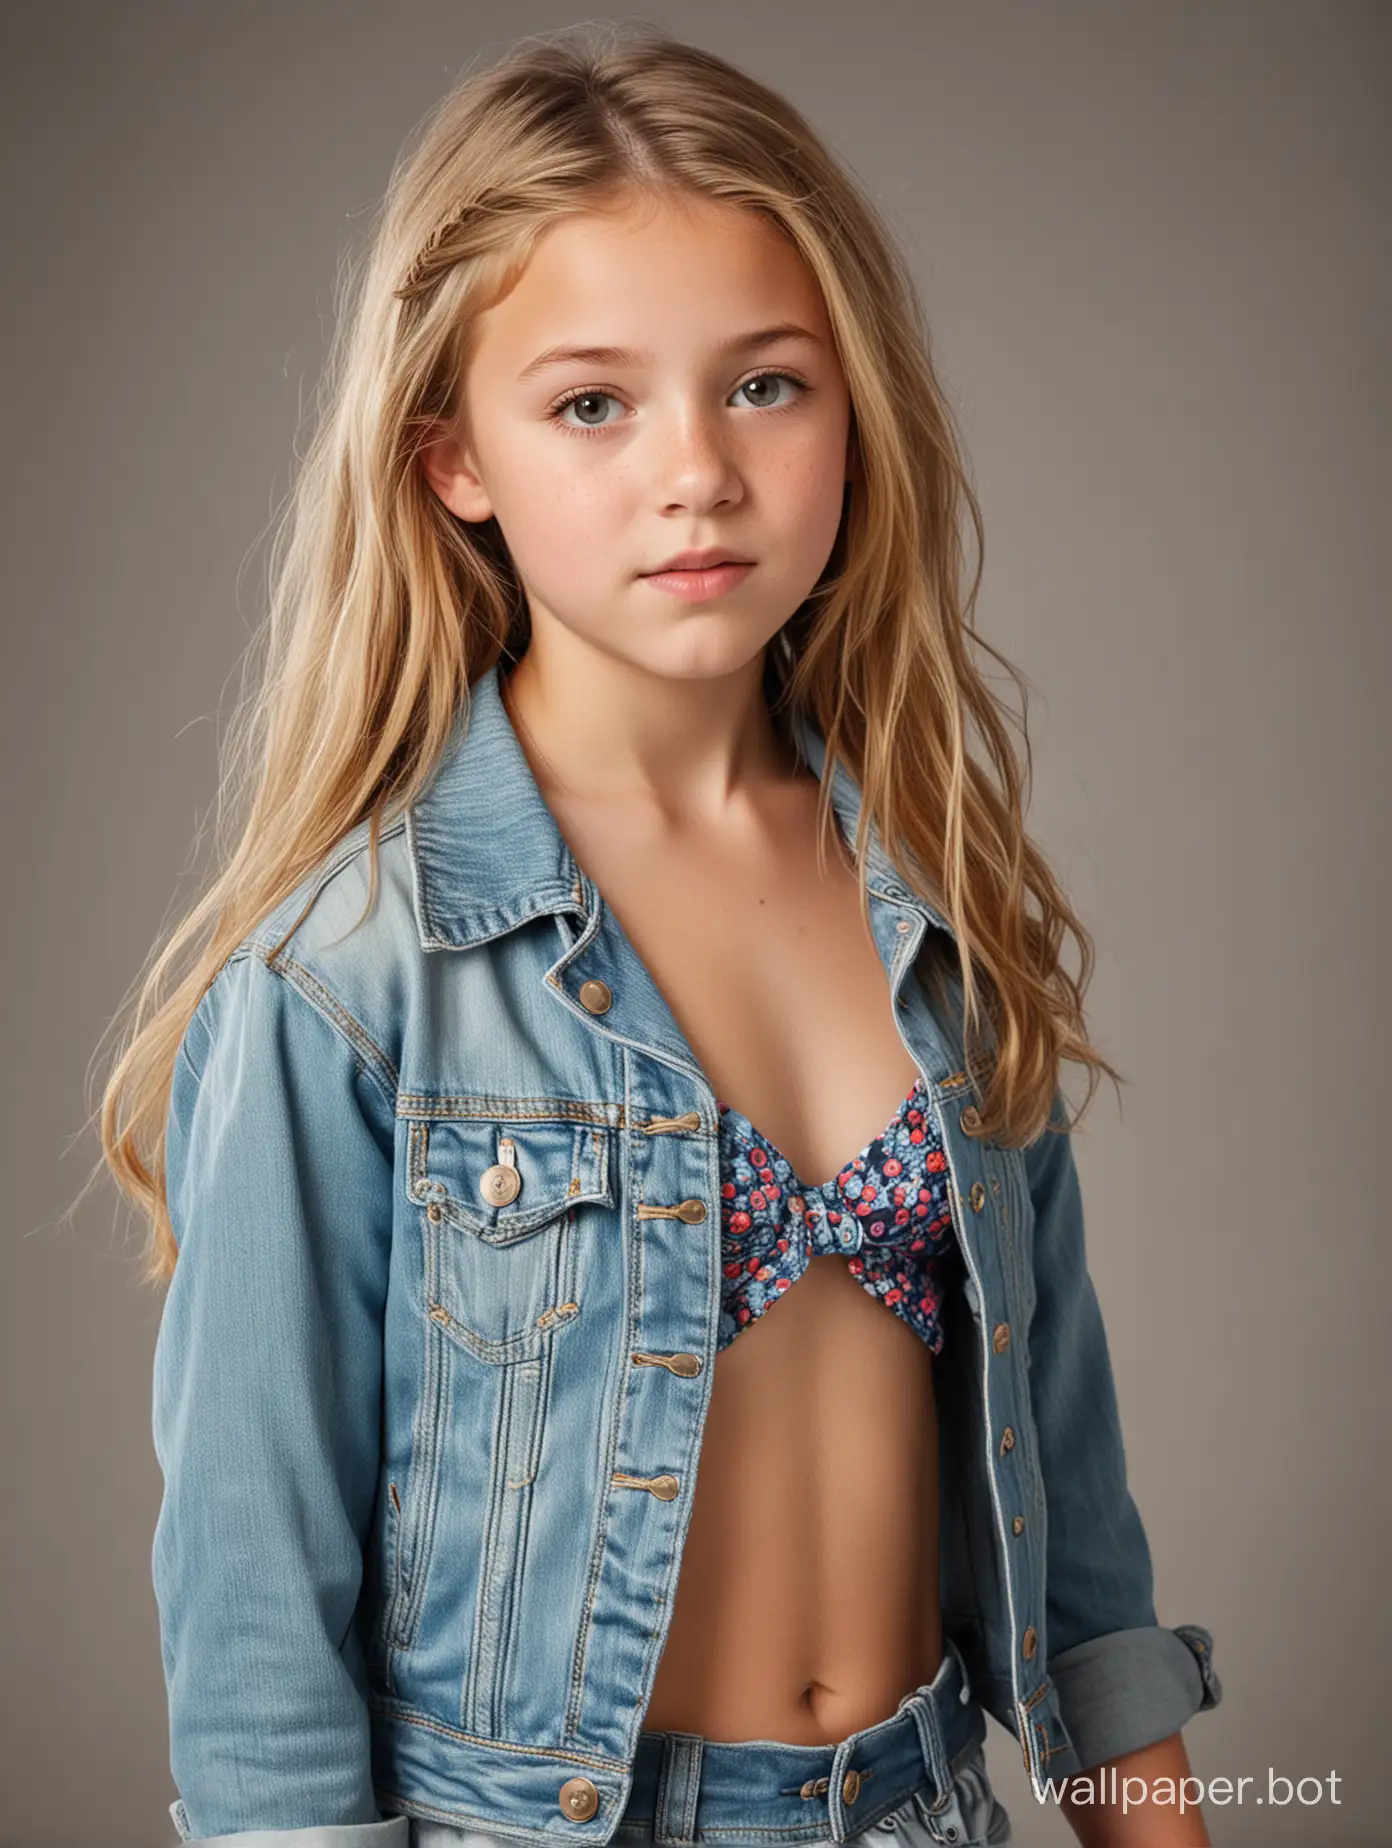 Professional studio portrait photograph of a beautiful little 8 year old preteen Caucasian girl. Open denim jacket, pleated skirt, show naked chest and nipples She has a perfect most gorgeous alluring little preteen child face, slight freckles, blonde braided hair. Angry bemused expression. She has a perfect little preteen child body, short stocky stature, tiniest little flat undeveloped preteen child breasts, puffy nipples, slender waist, round broad hips, curvy thighs. 